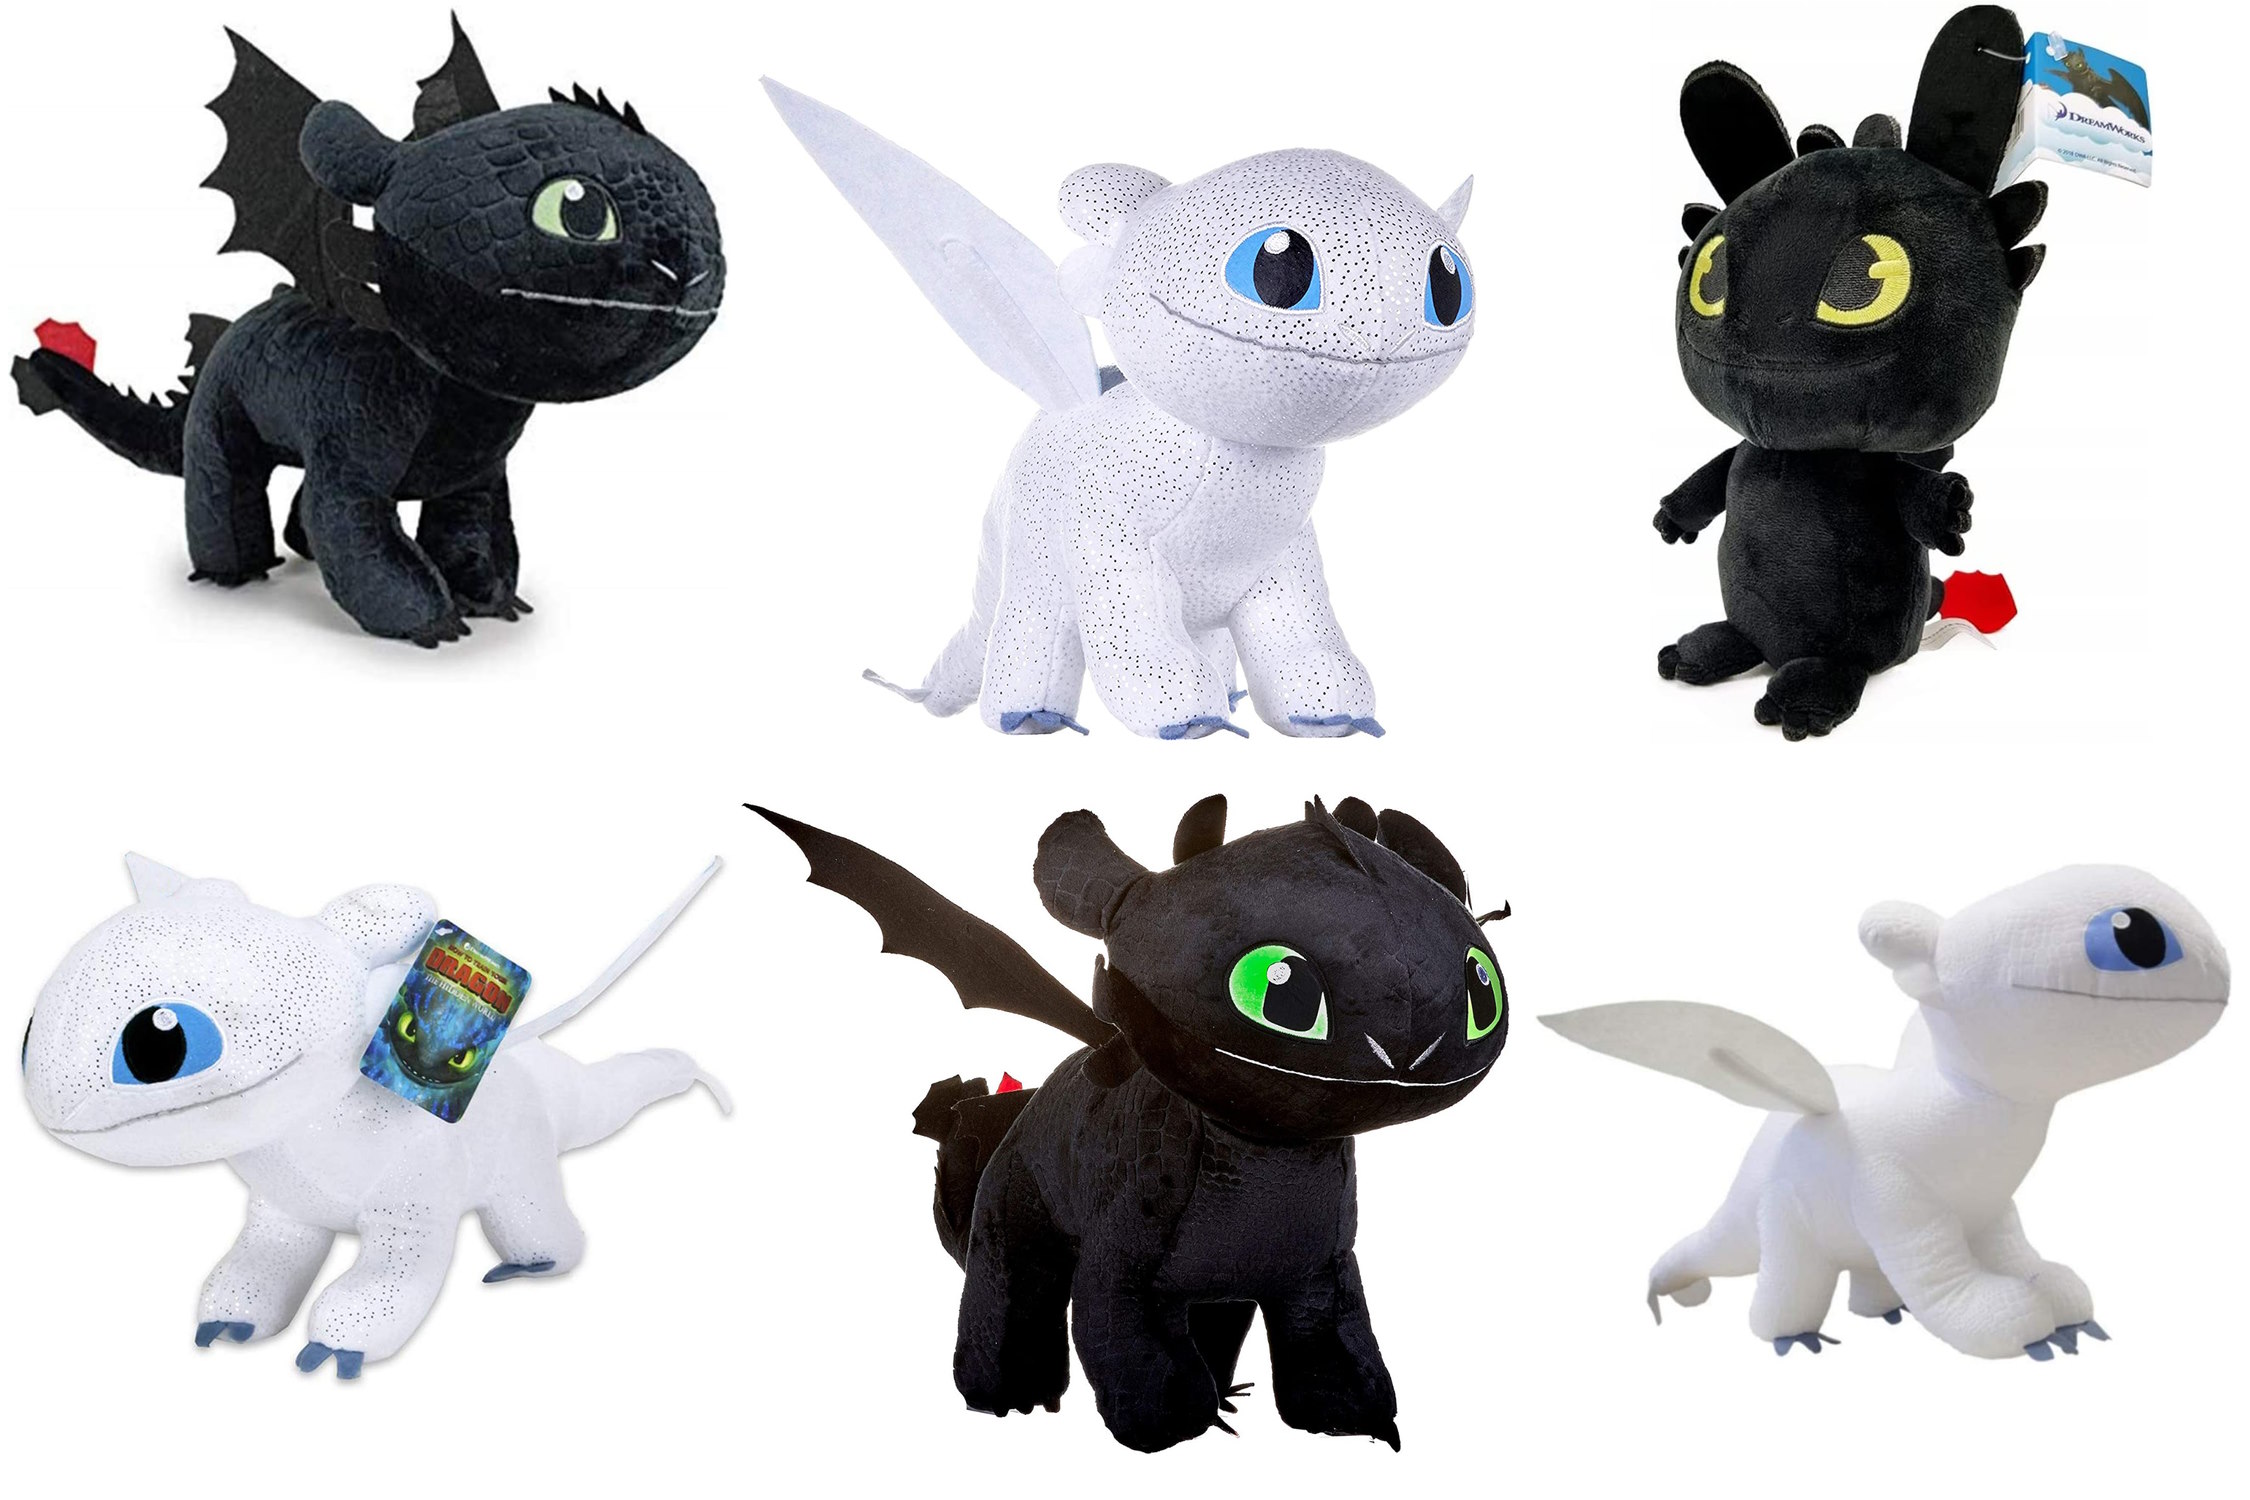 Plush How to Train Your Dragon